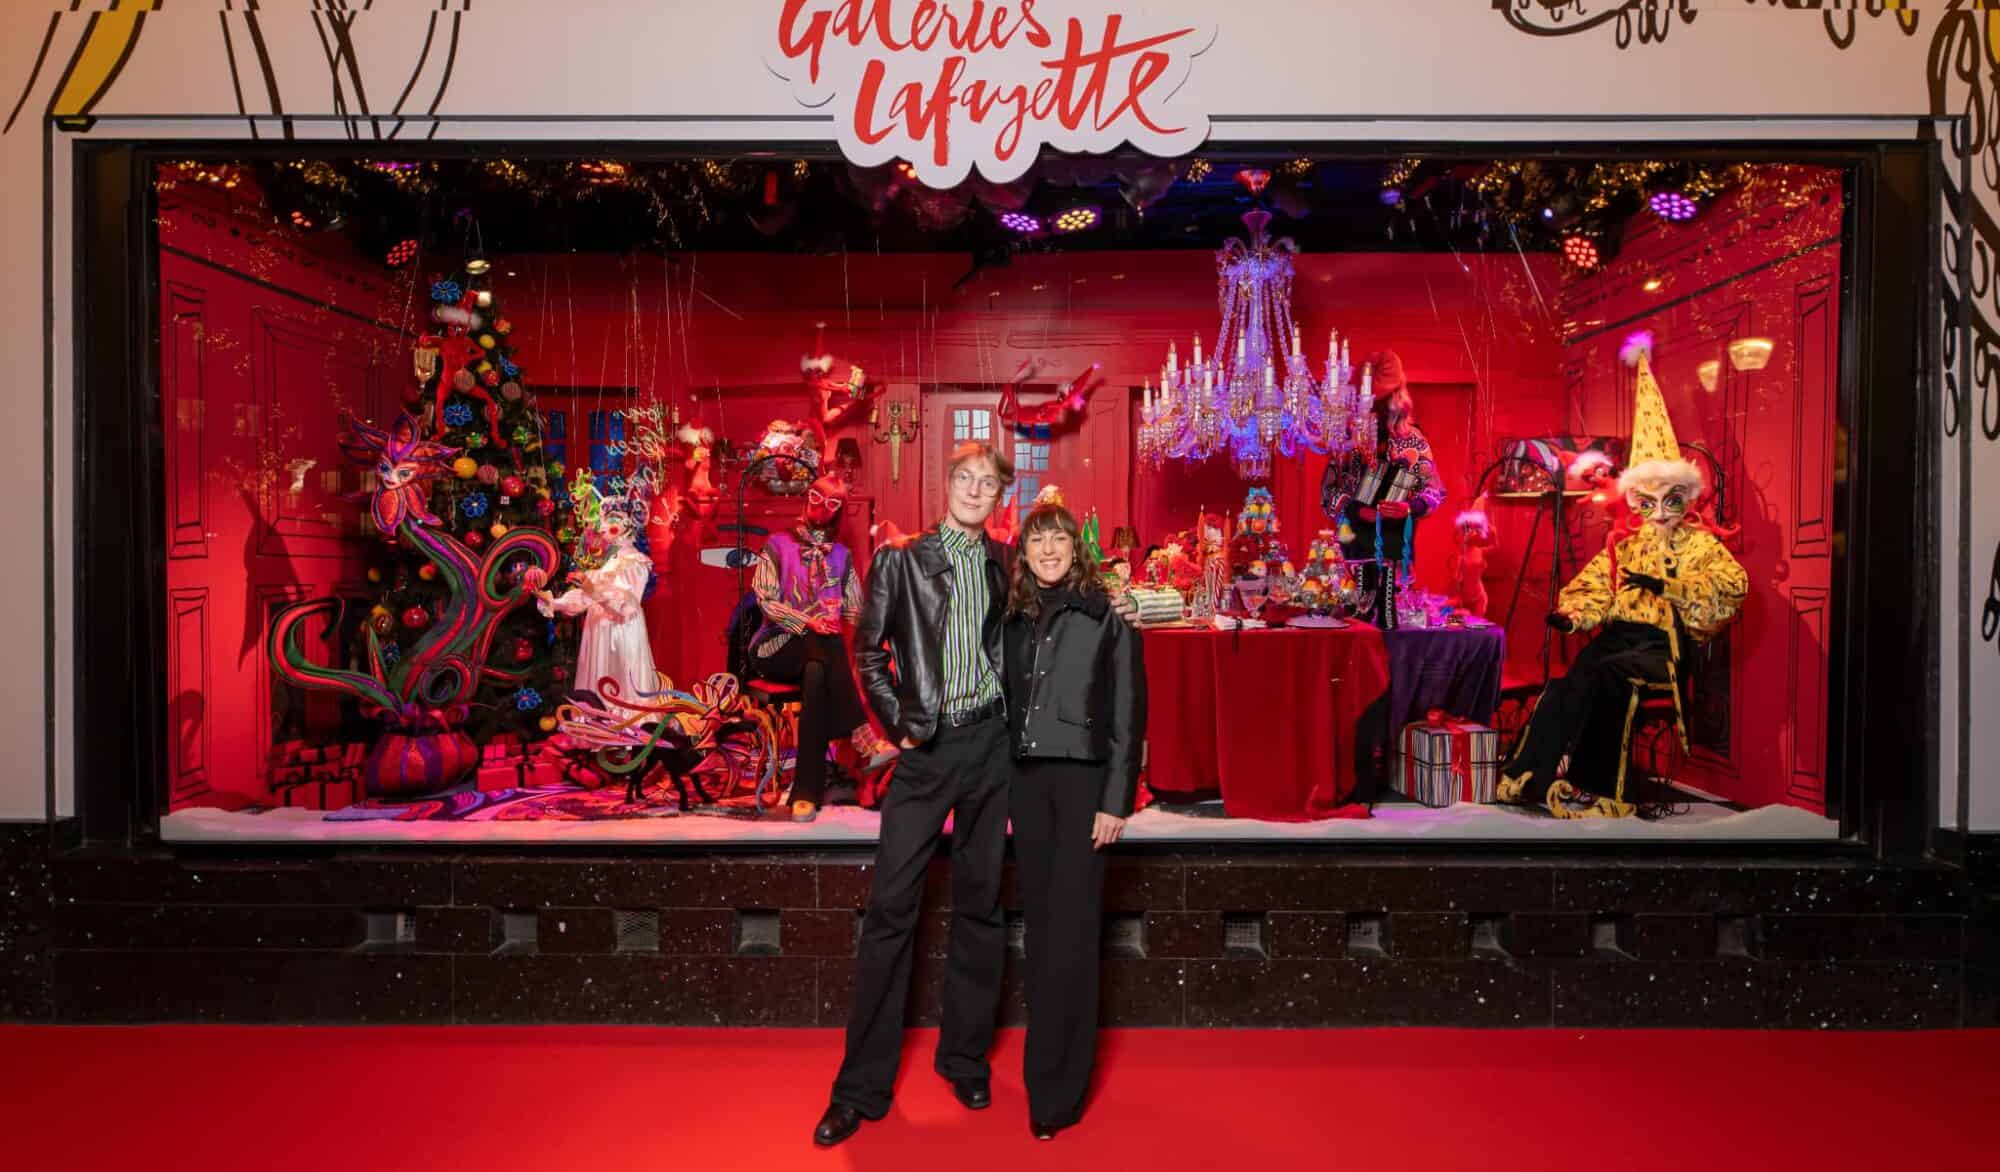 The fashion designer Charles de Vilmorin and singer Juliet Armanet pictured in front of Galeries Lafayette Paris Hausmann's Christmas window display.